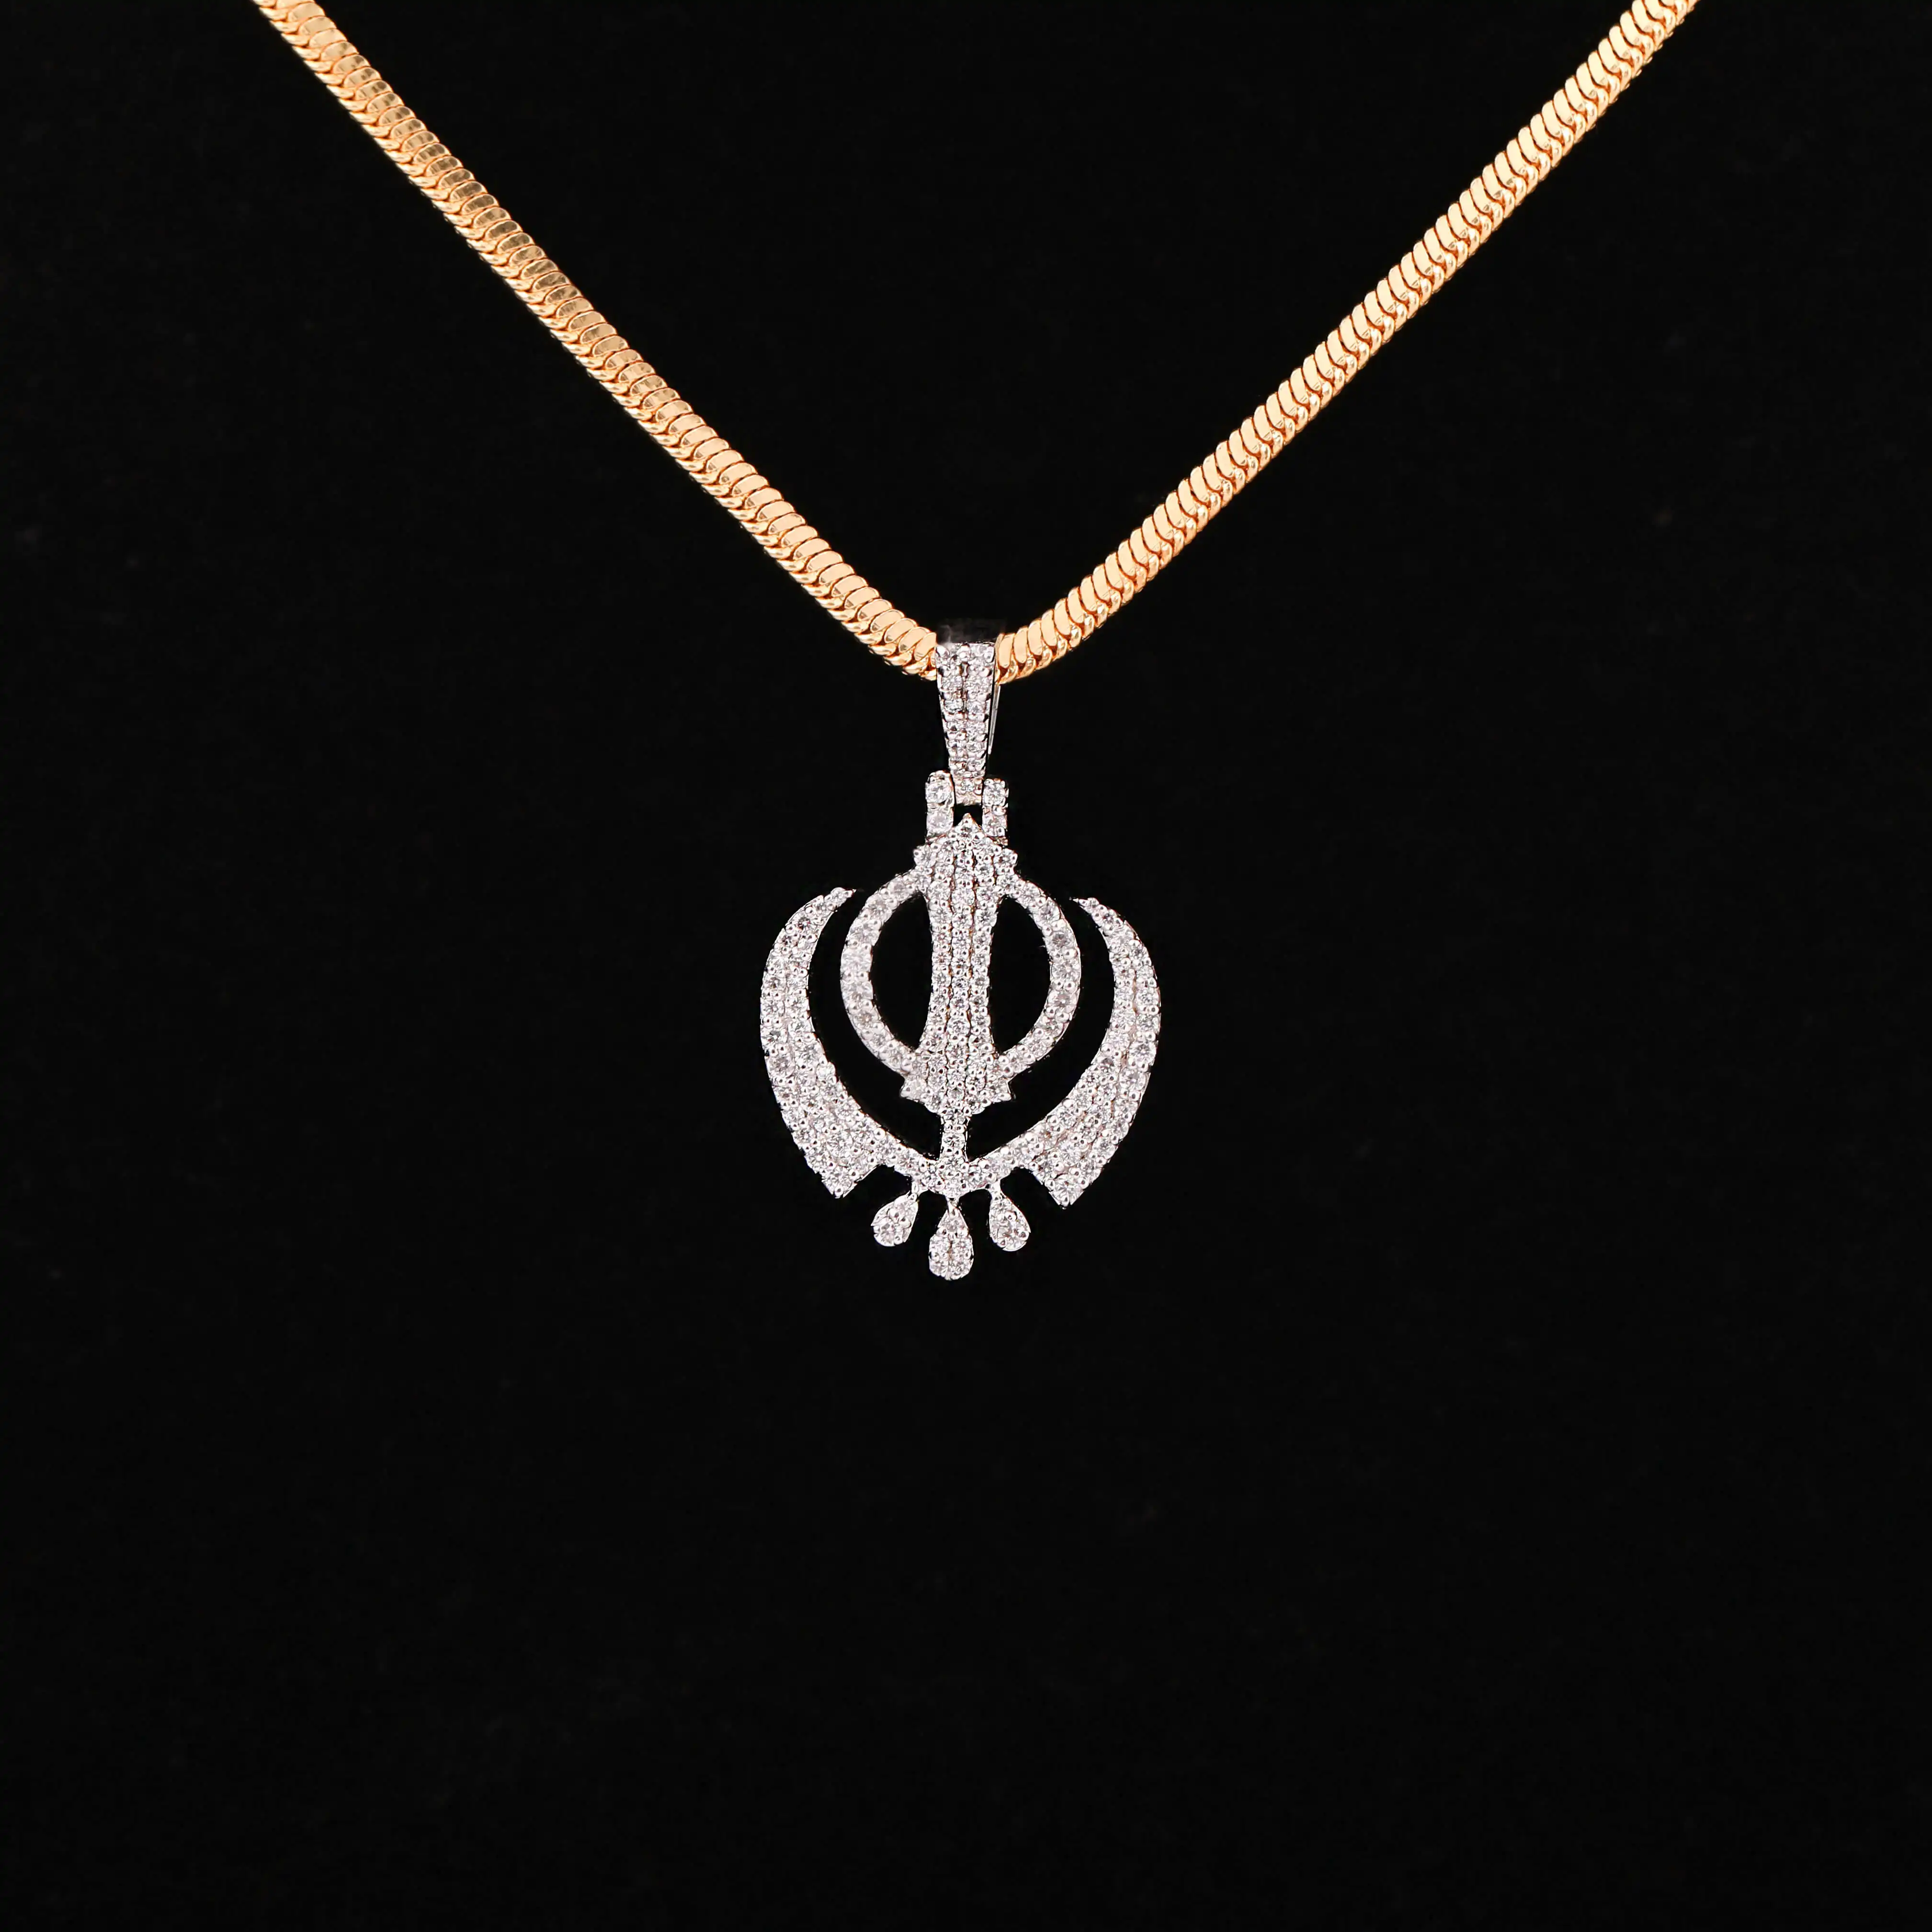 SIKH RELIGION LOGO SHAPED AESTHETIC PENDANT WITH TINEY ROUND LAB GROWN DIAMOND IN 14KT SOLID GOLD FOR ALL OCCASIONS FOR WOMEN